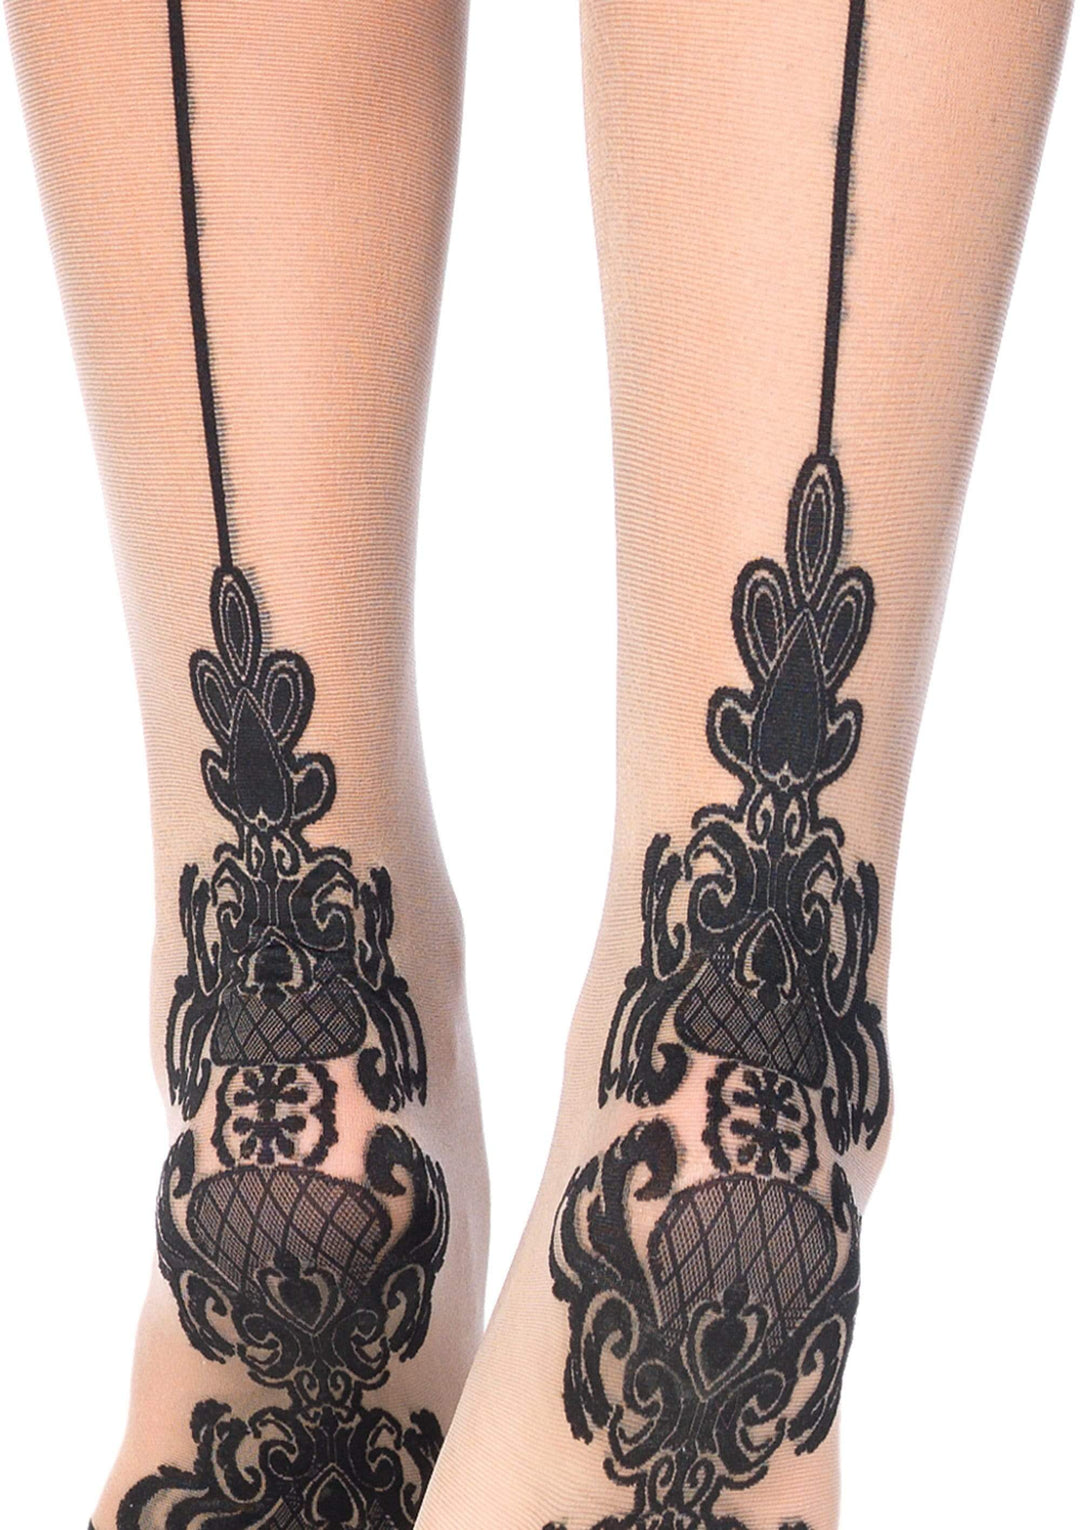 Sheer Stockings with Baroque Heel and Backseam